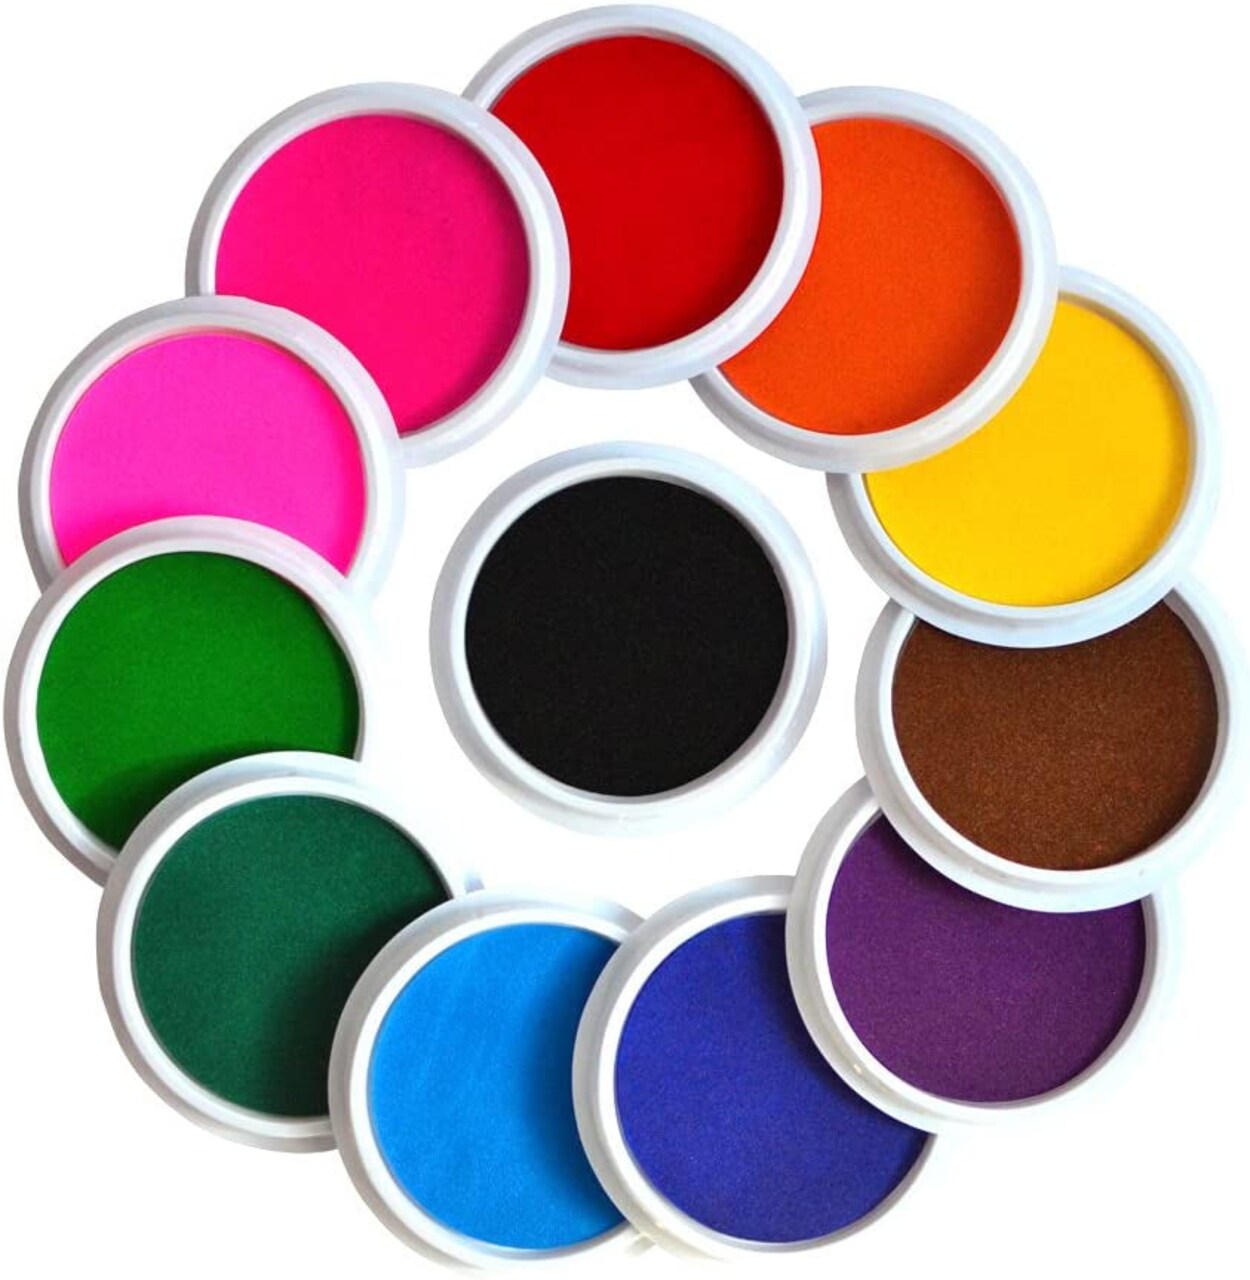 Washable Large Ink Pads for Kids Crafts Projects Rubber Stamps 12 Colors